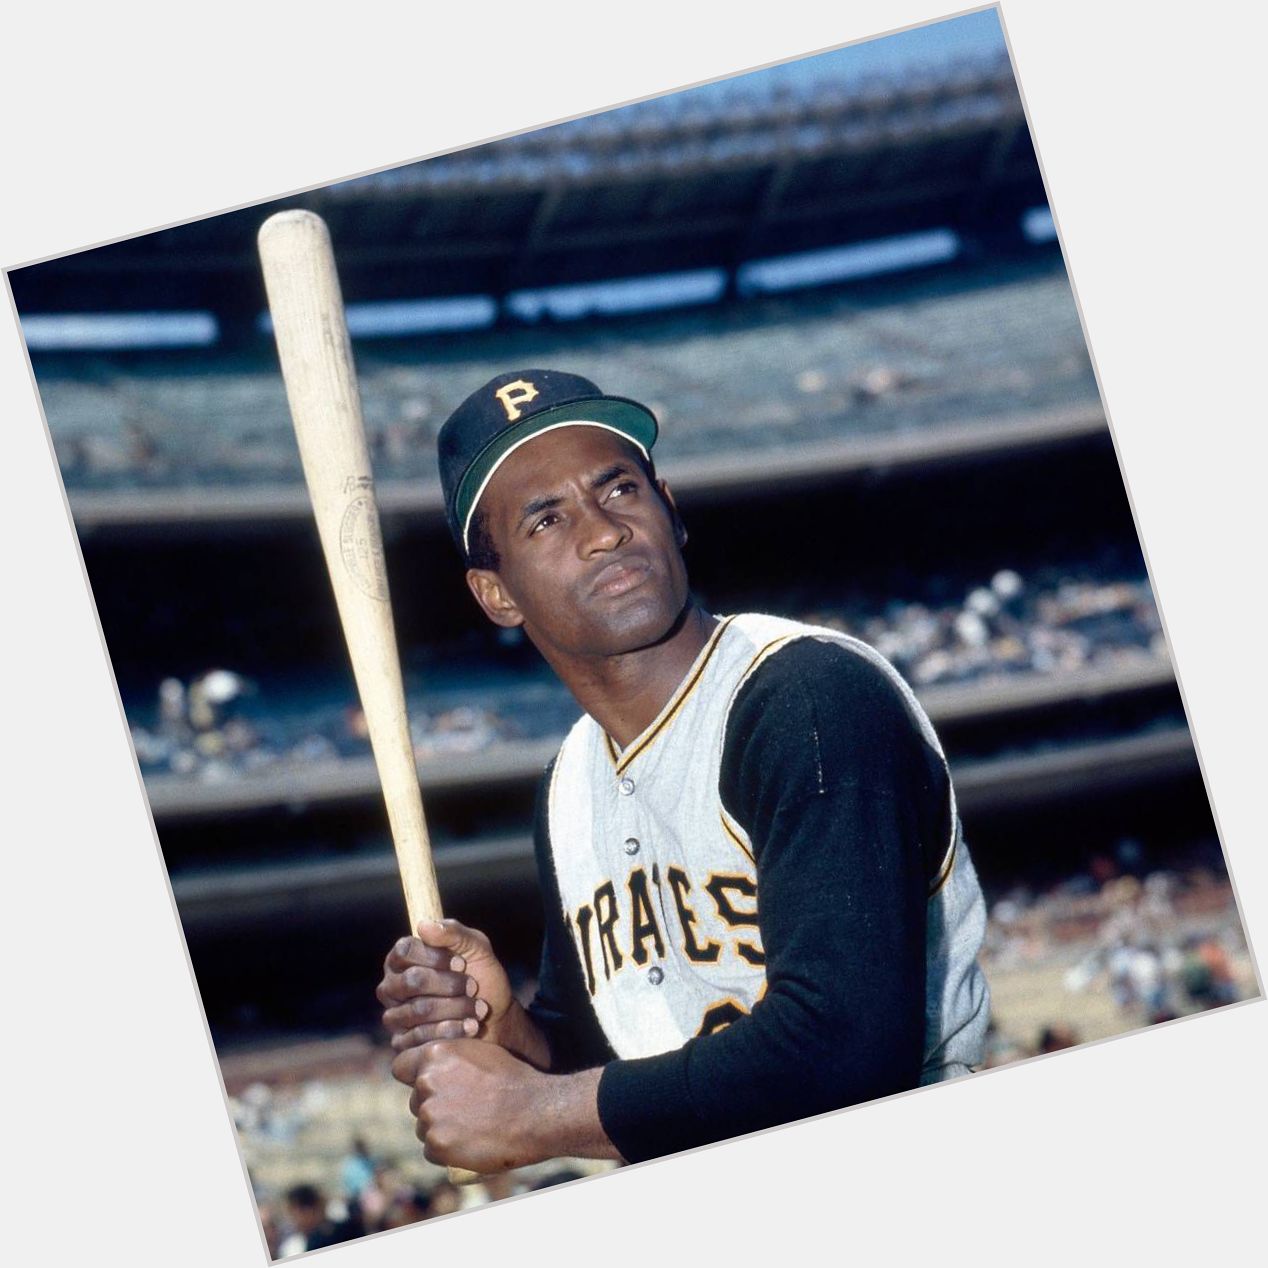 Happy Birthday to Roberto Clemente, who would have turned 83 today! 